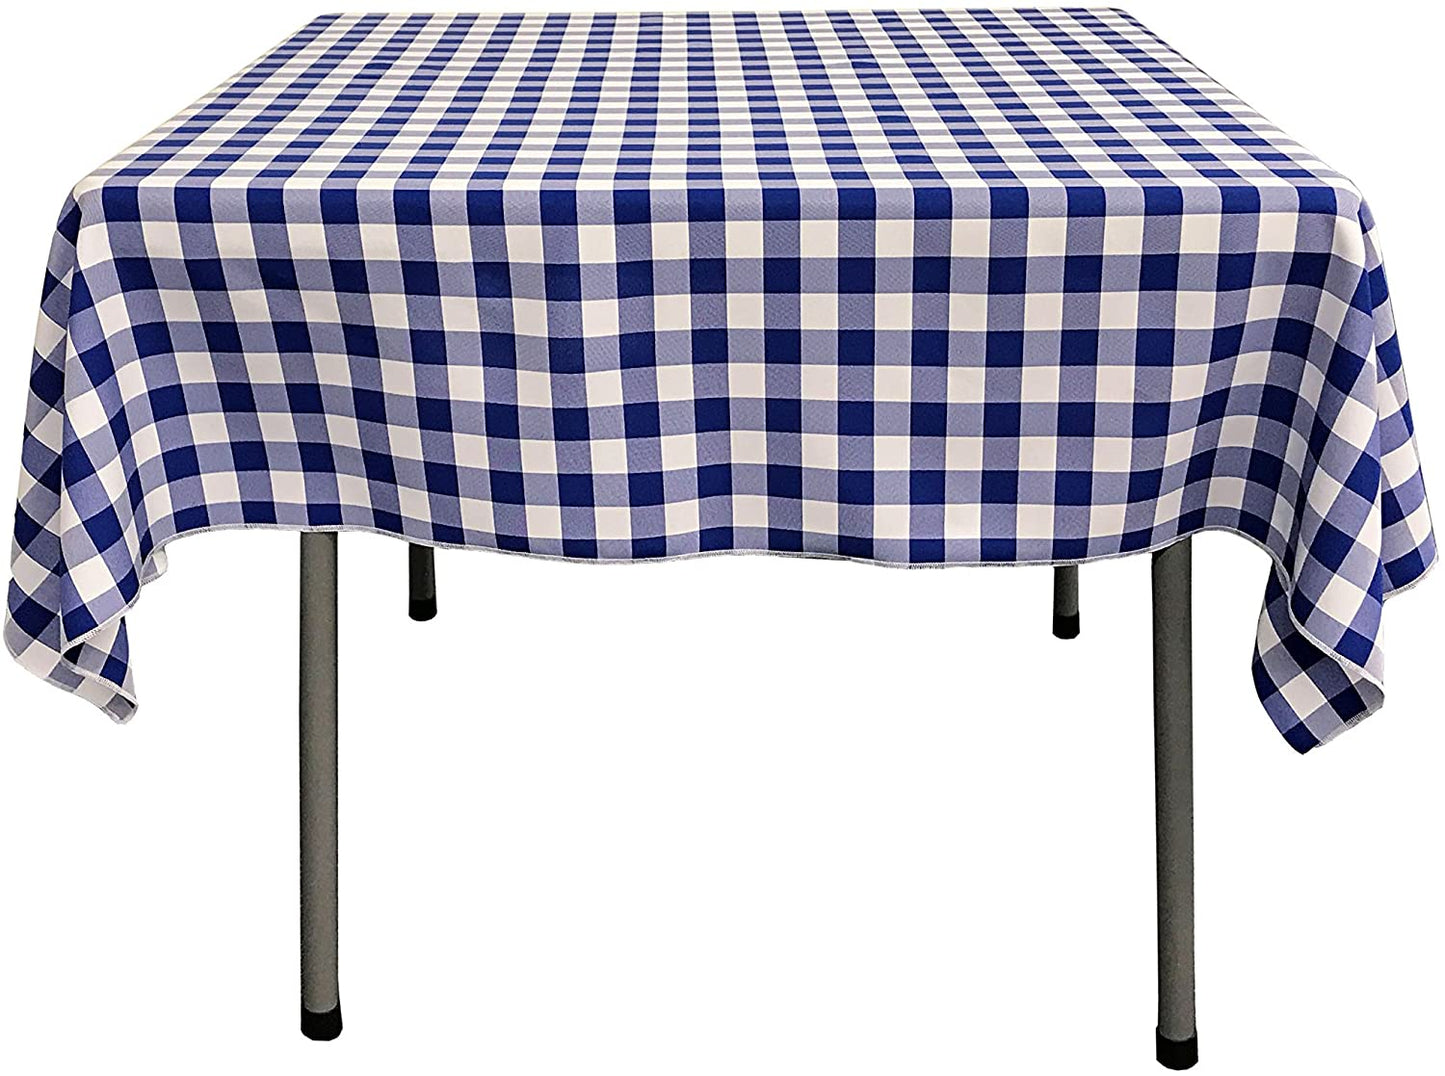 Gingham Checkered Square Tablecloth Royal and White